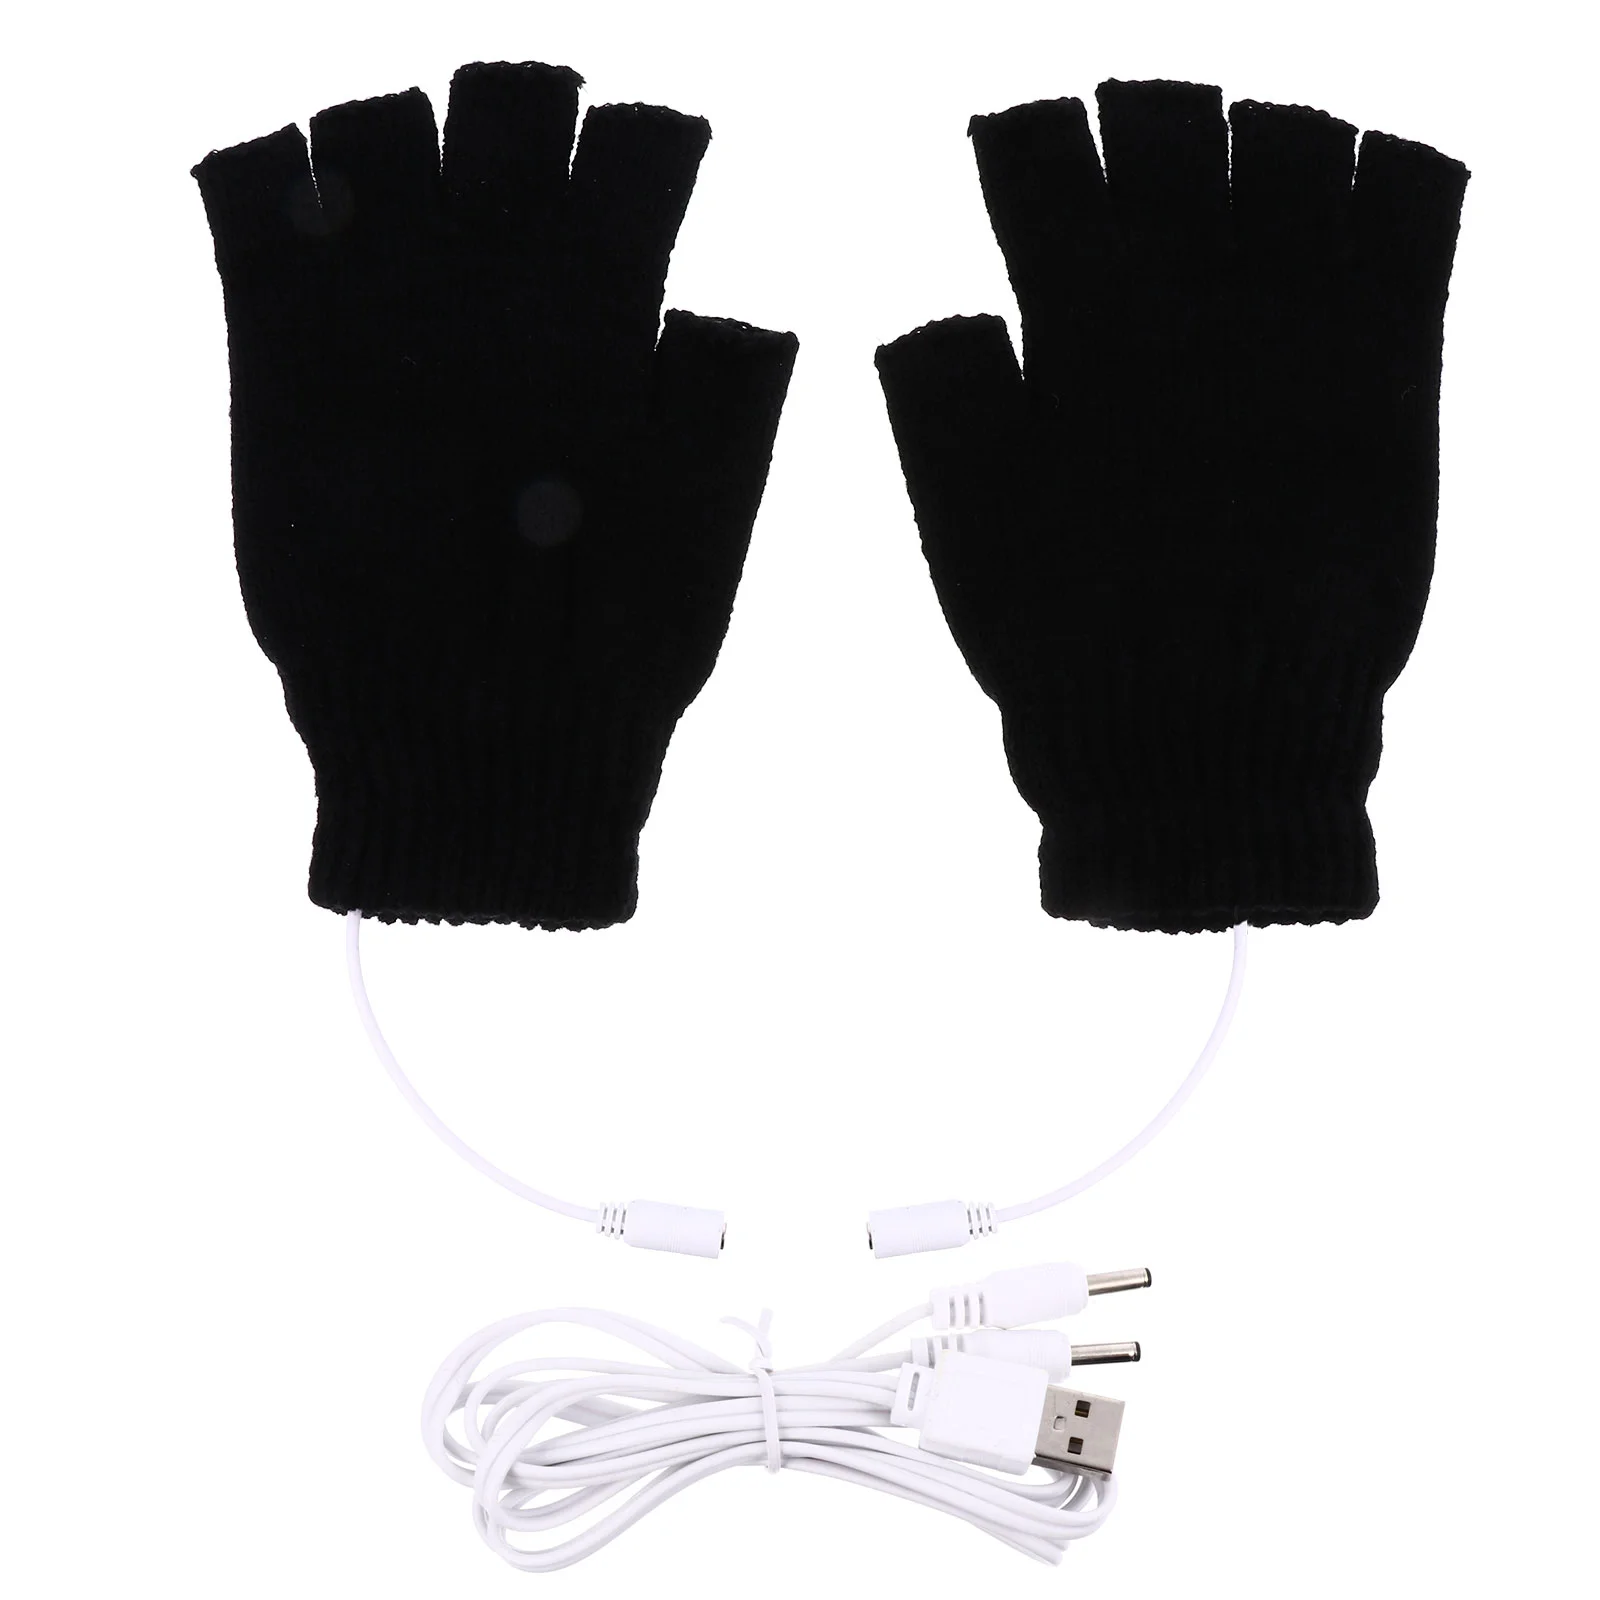 Cold Weather Gloves Fingerless Gloves Winter Heating Gloves Fingerless Warmer Gloves Heating Half Bicycle Gloves